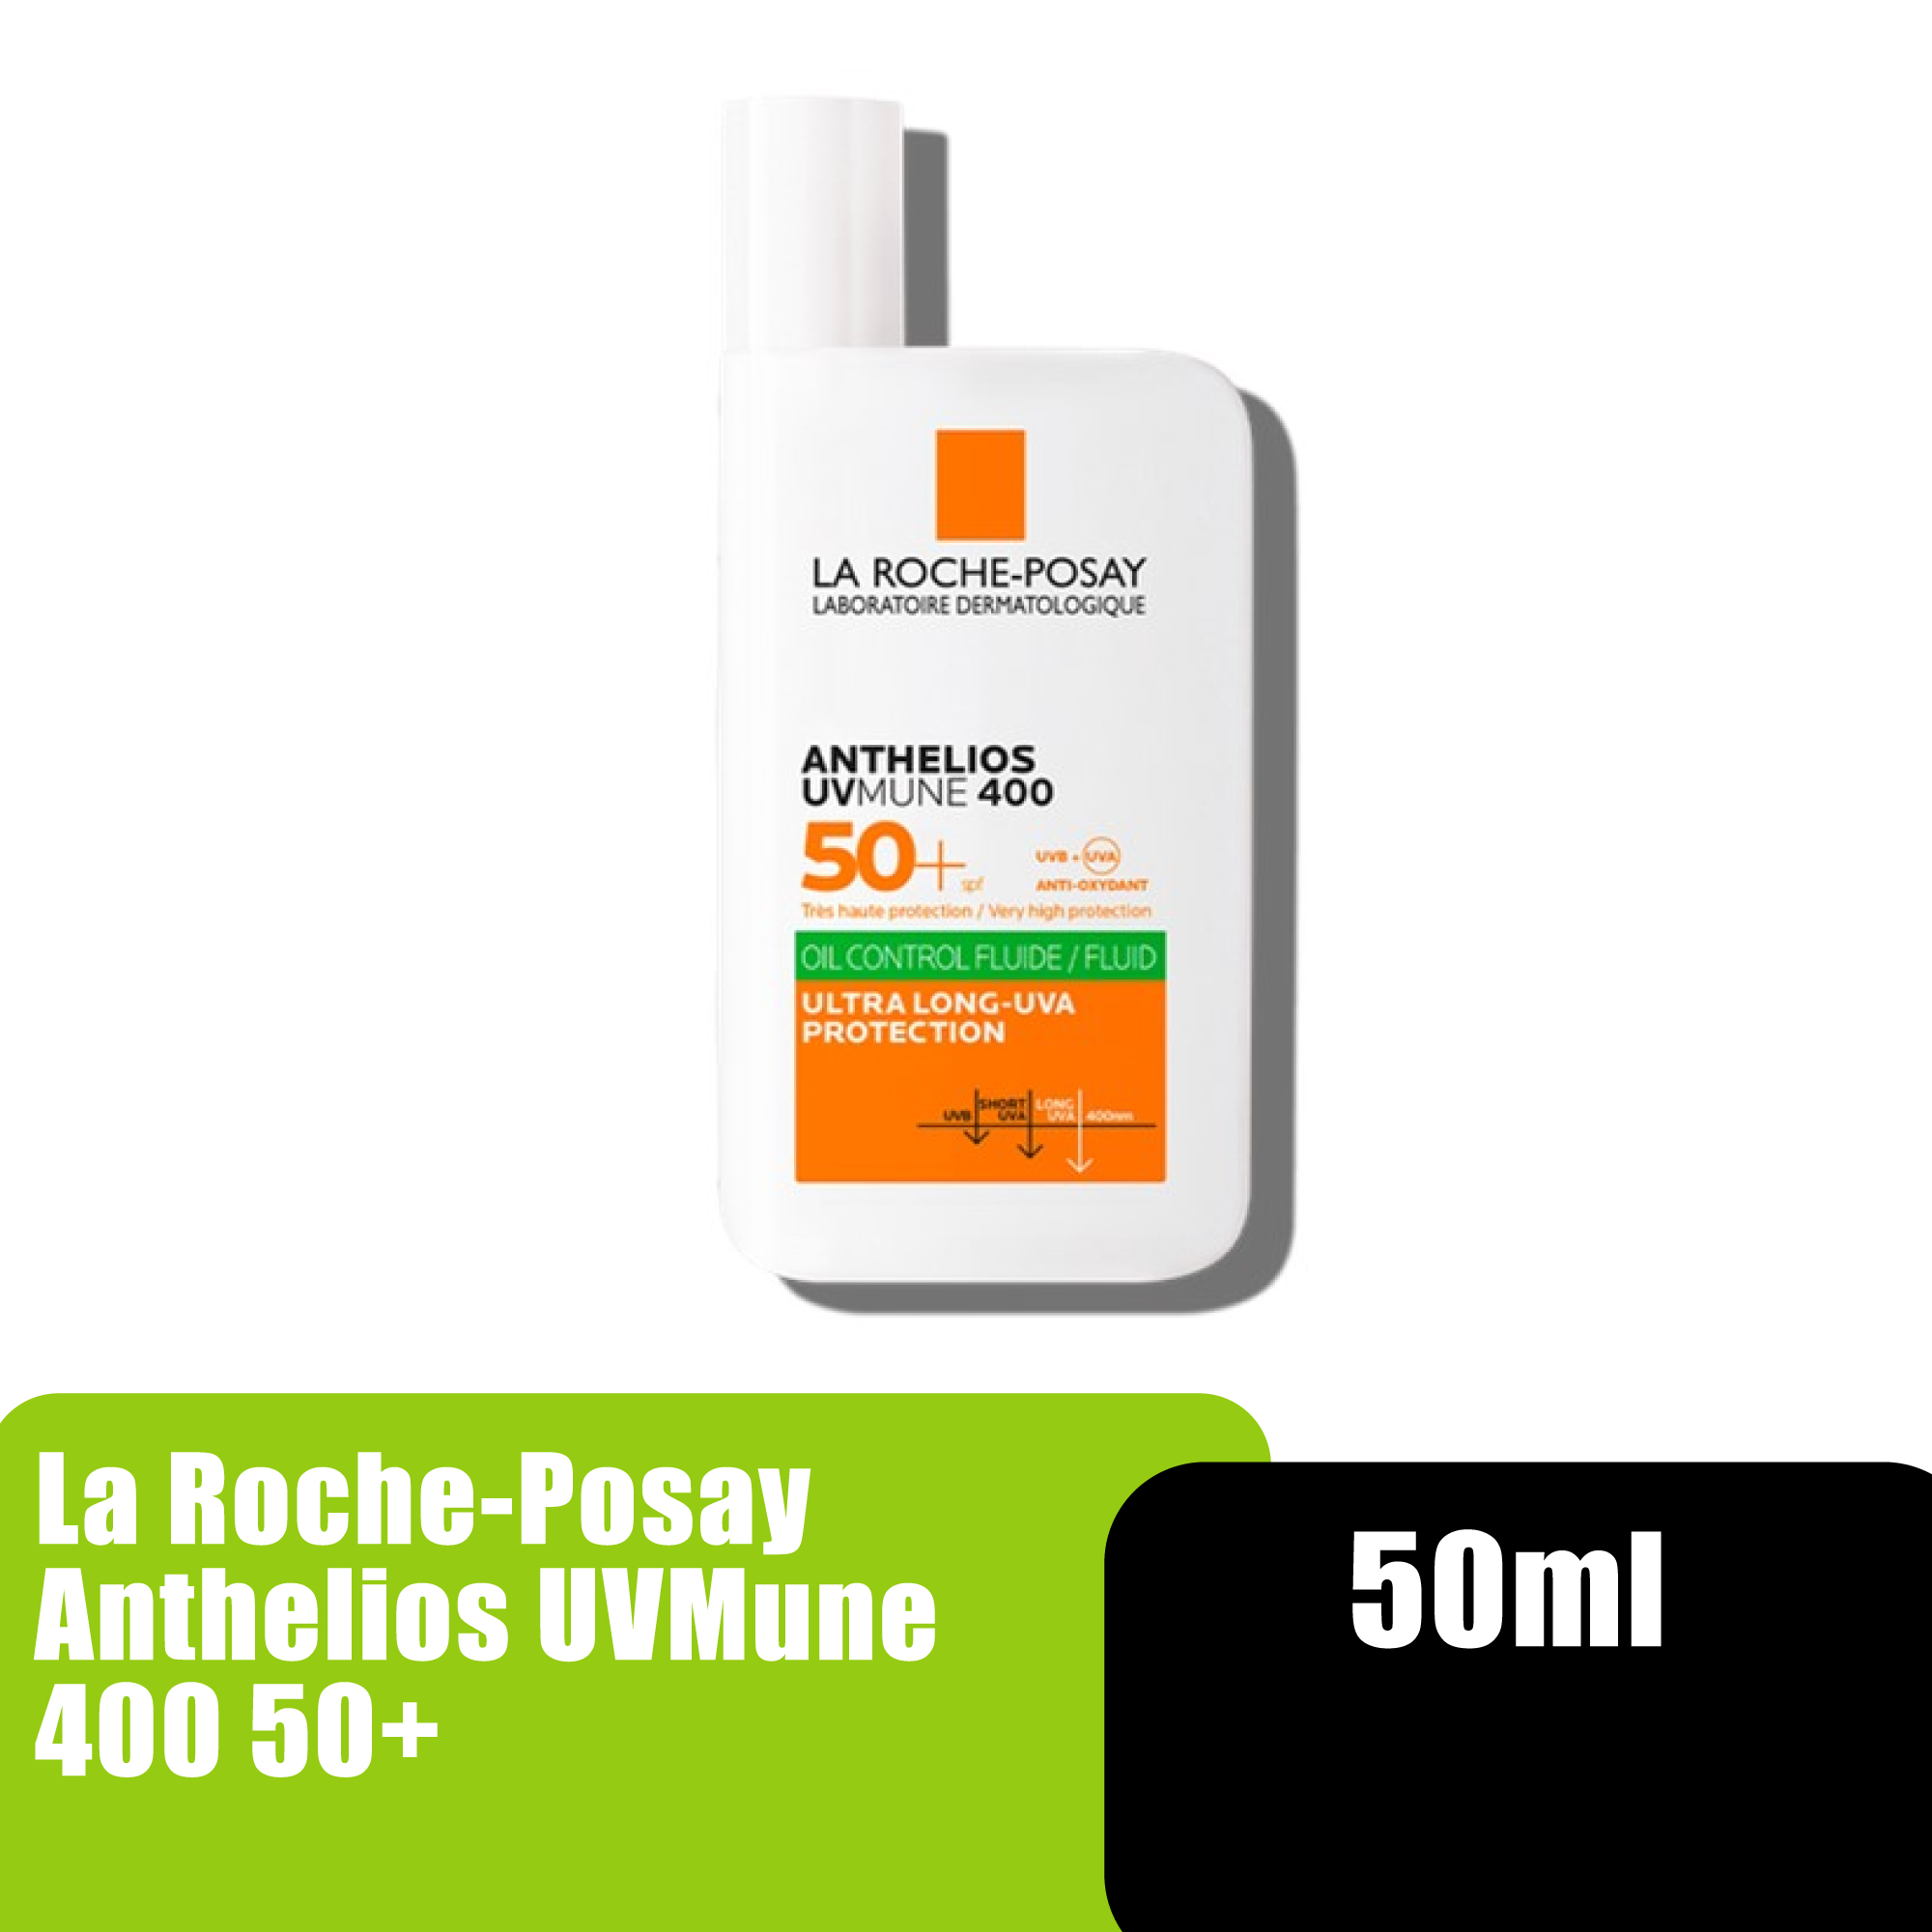 La Roche Posay Anthelios UVmune 400 Control Fluid SPF50+ Sunscreen 50ml (For Combination and Oily Skin)